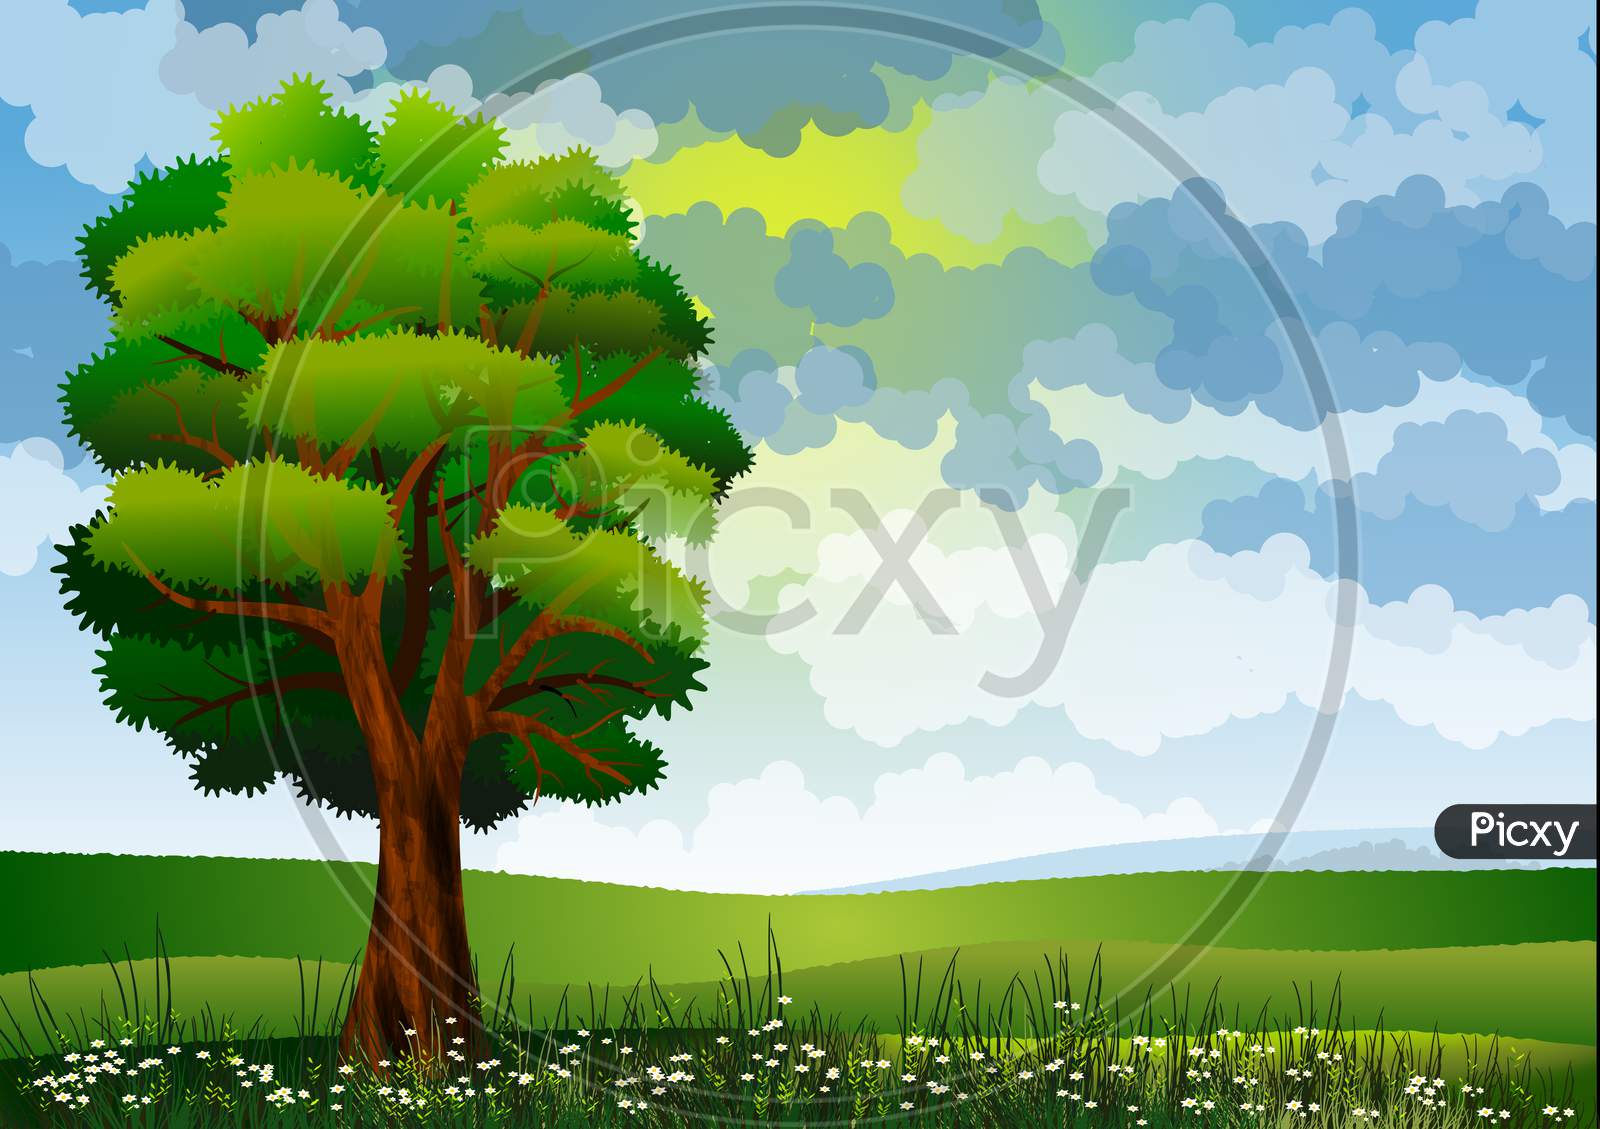 Beautiful illustrated background on trees and mount in the nature